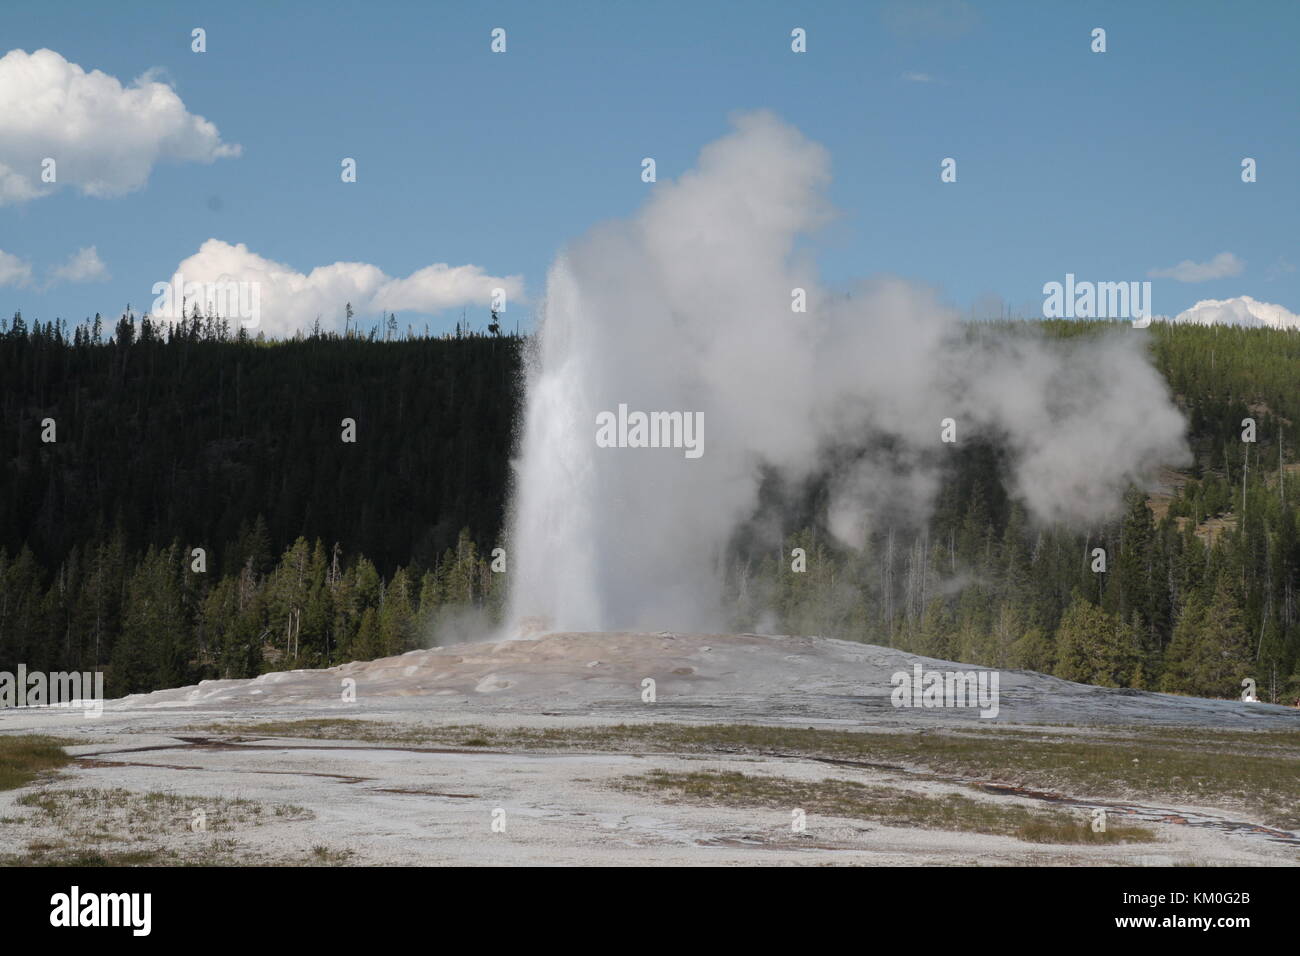 The eruption of the famous Old Faithful geyser, Yellowstone National Park, Wyoming, USA. Stock Photo